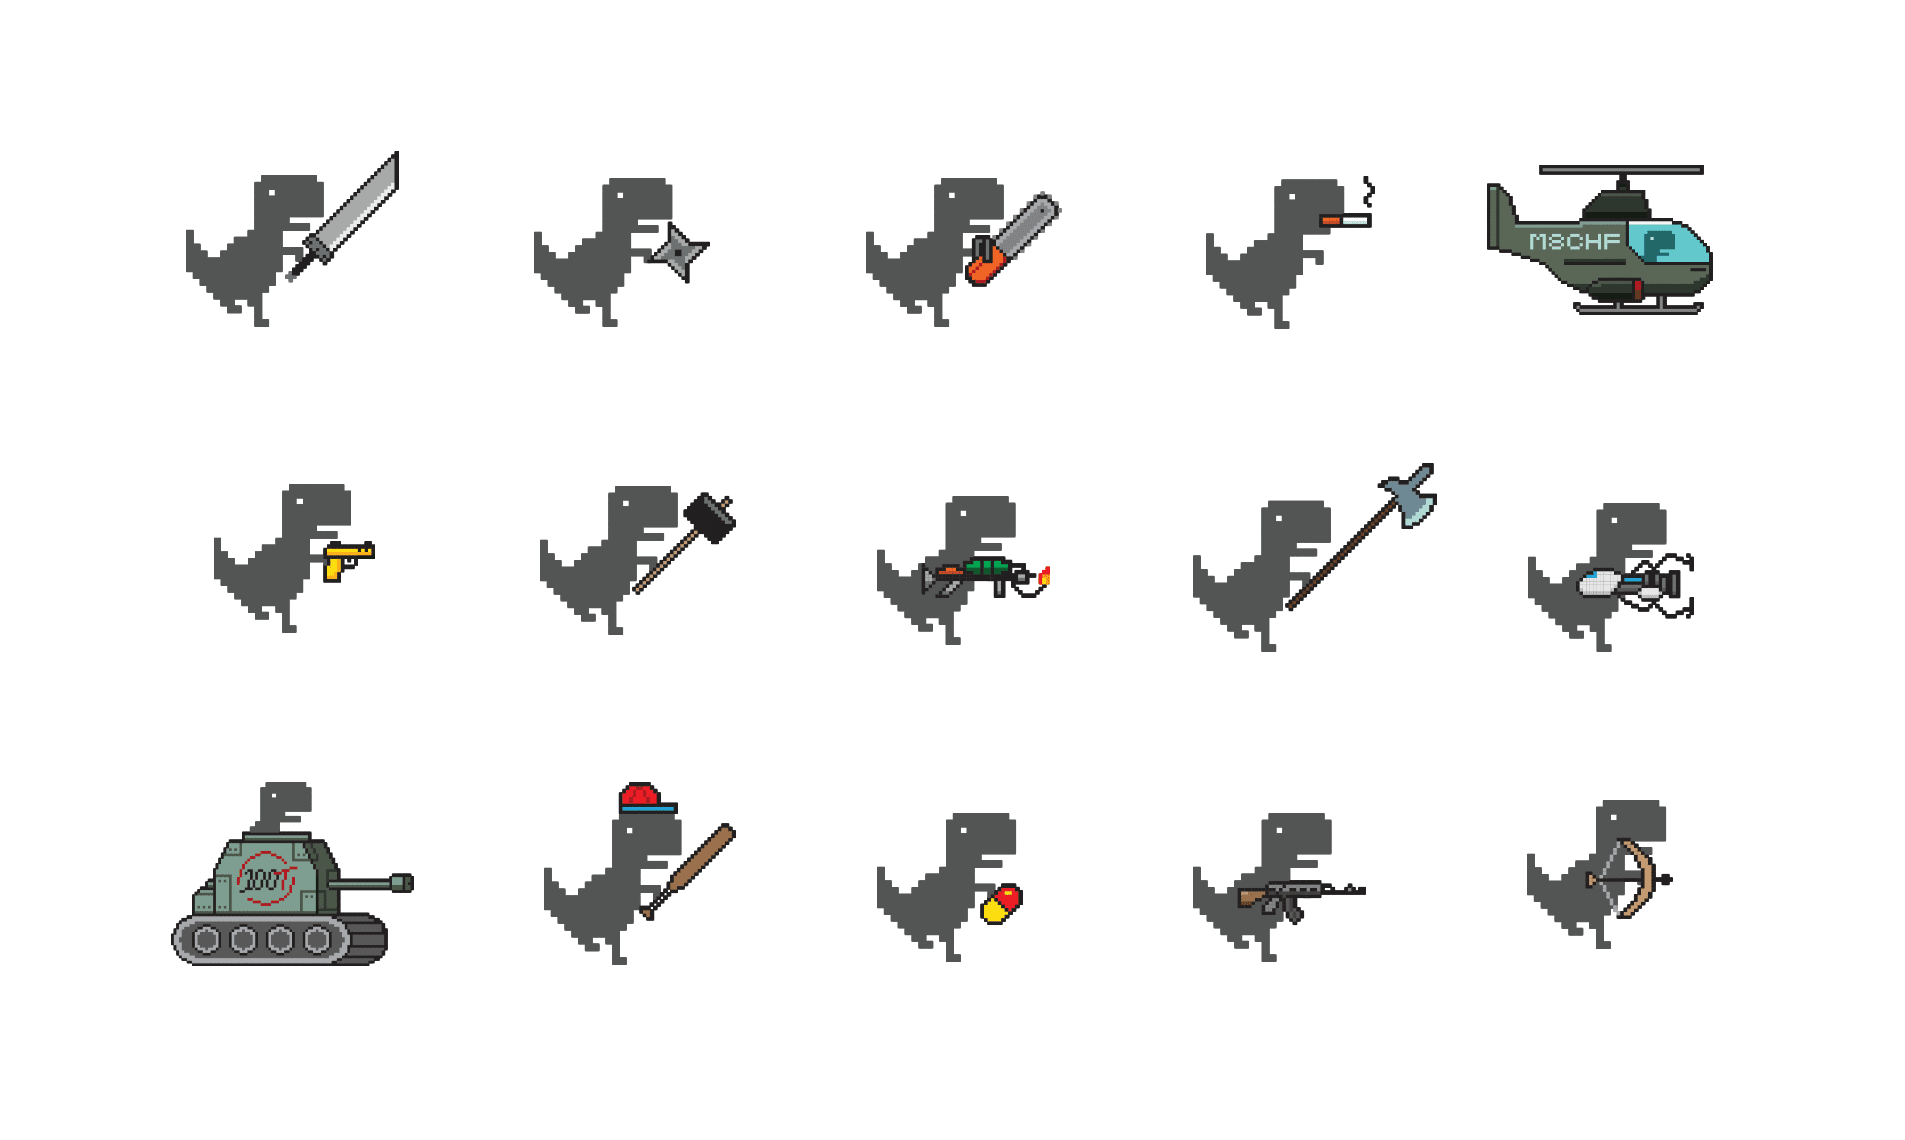 The Chrome Dinosaur game — but with guns, tanks, and drugs